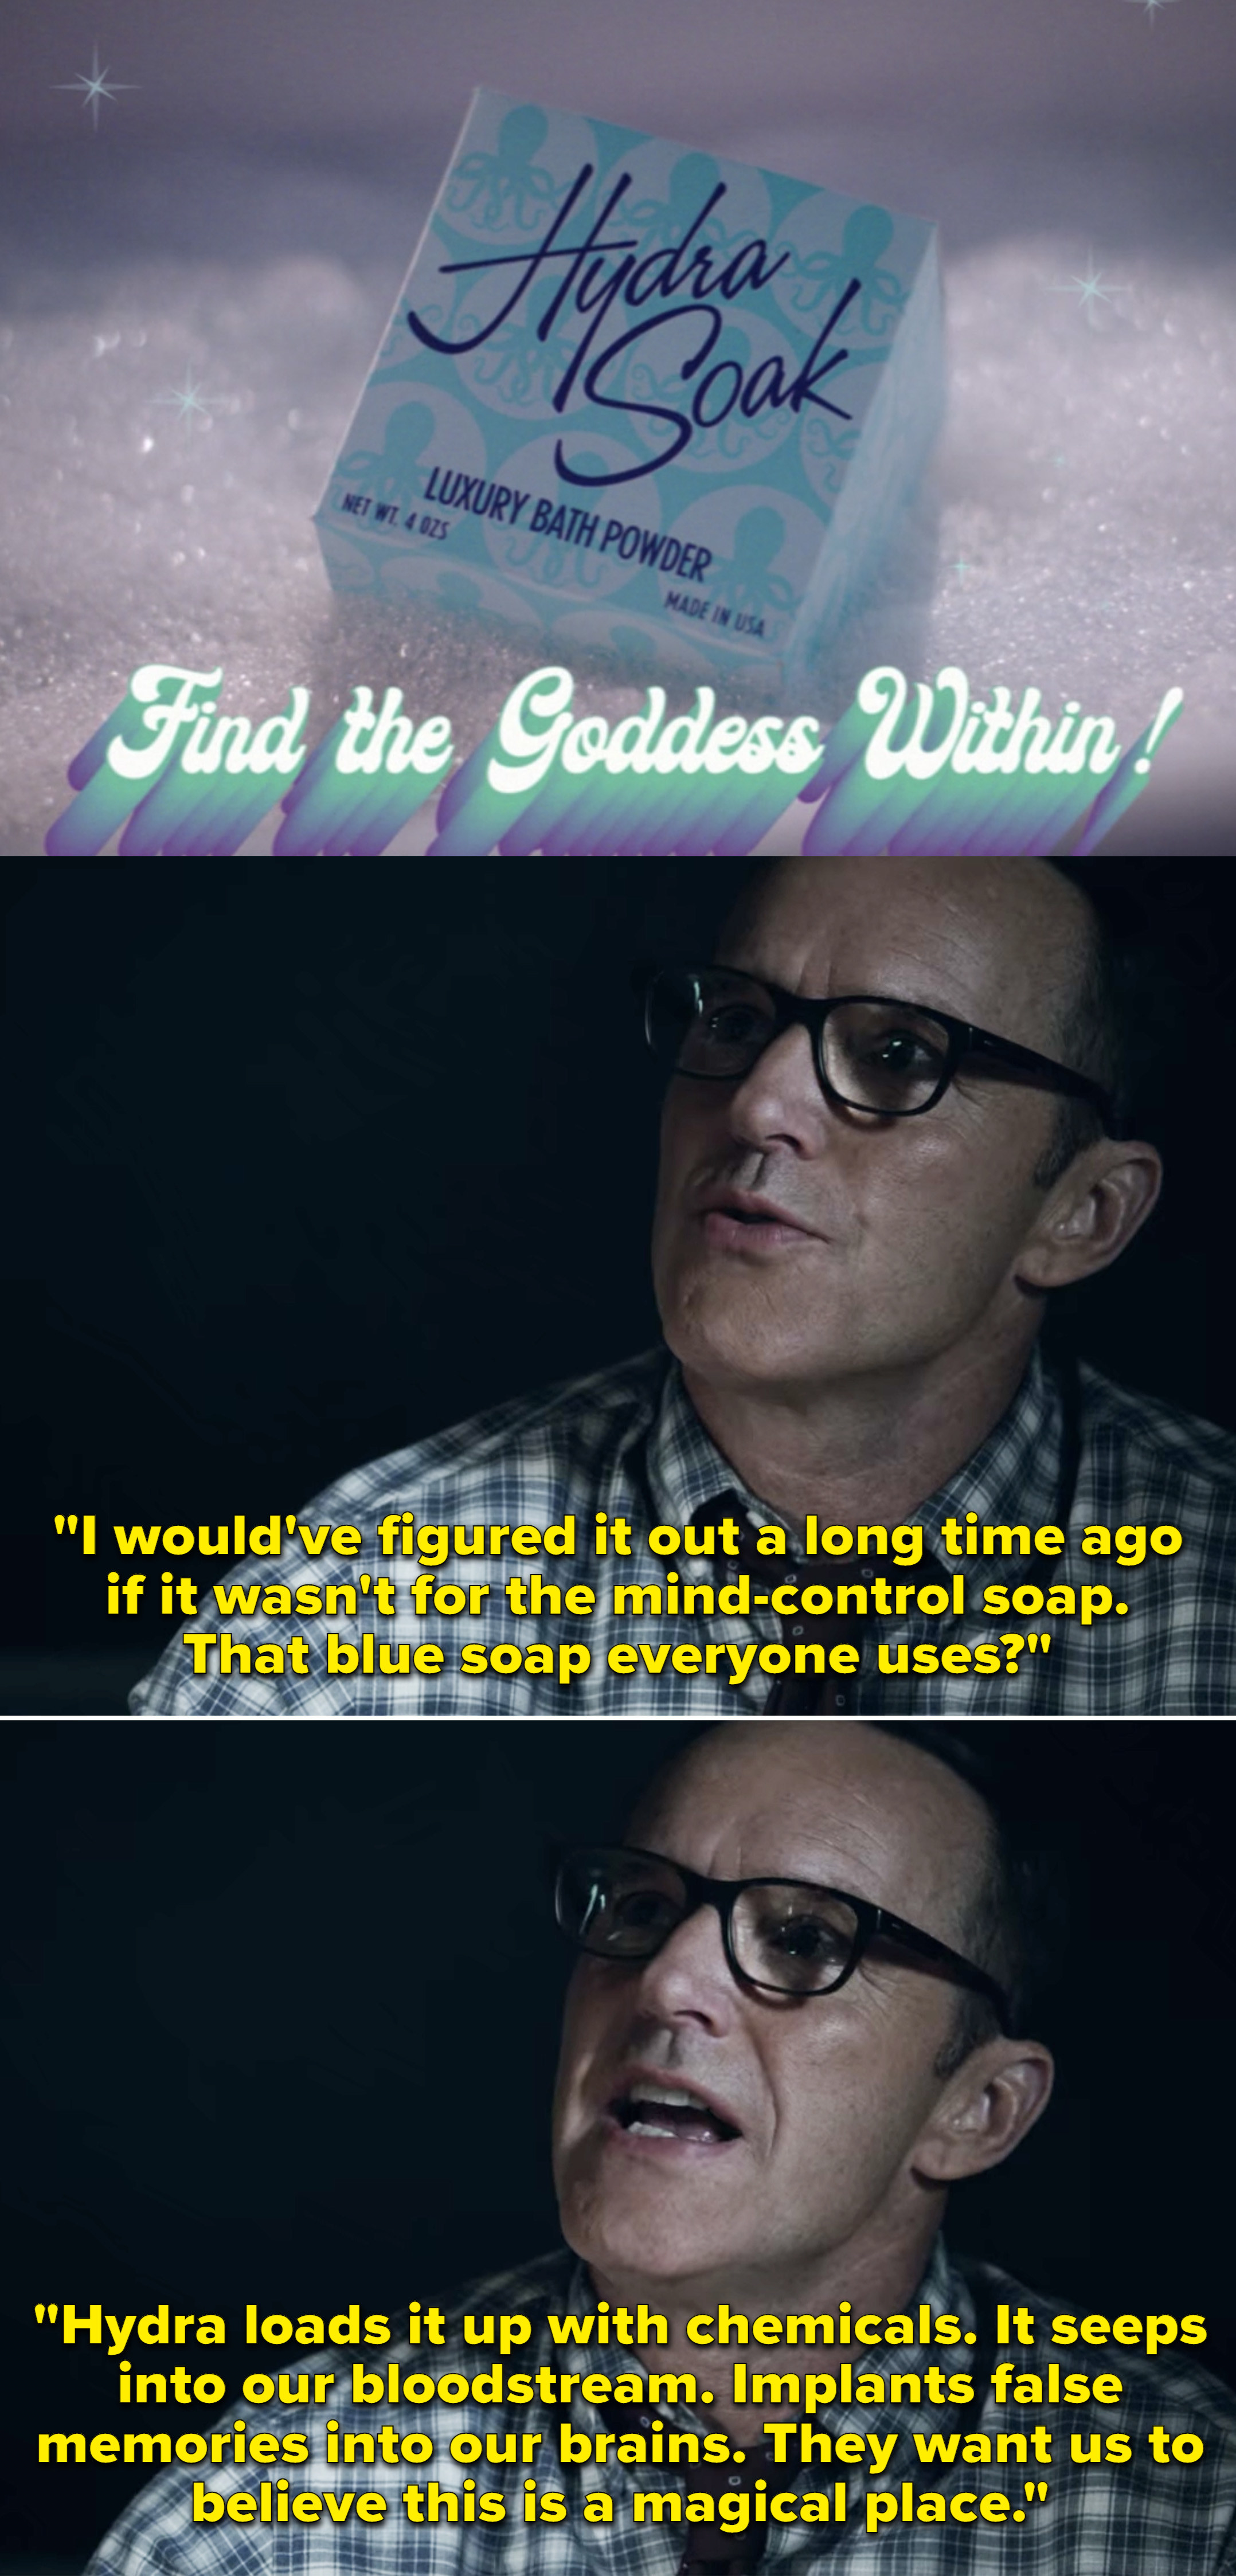 Coulson explaining that the mind-control soap &quot;implants false memories&quot; and wants people to believe that they are in a &quot;magical place&quot;